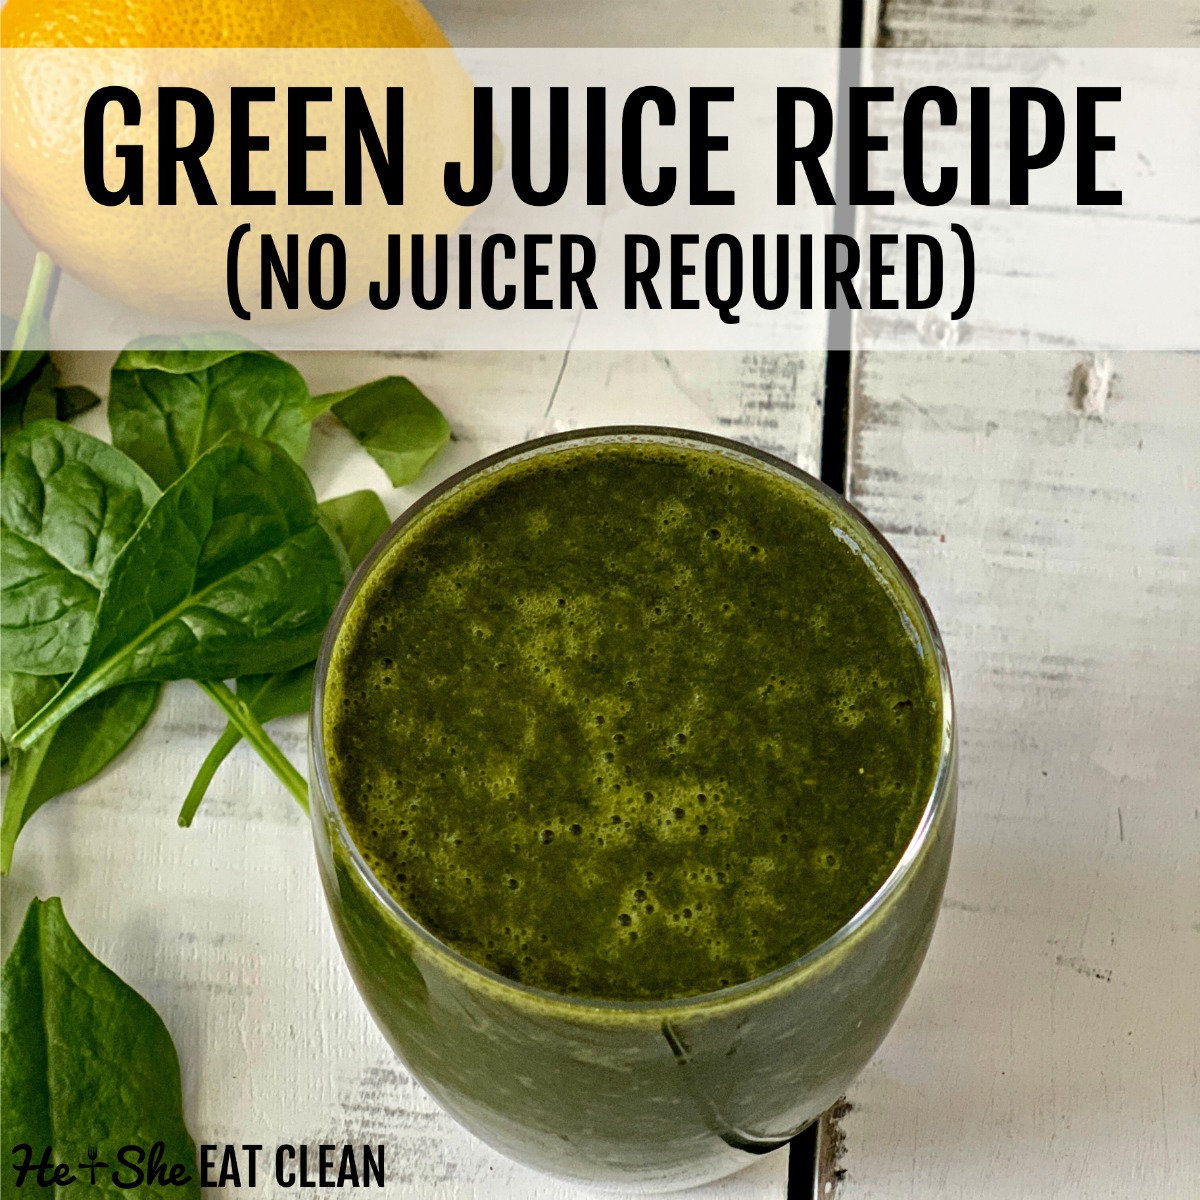 https://www.heandsheeatclean.com/wp-content/uploads/2013/02/green-juice-no-juicer-he-and-she-eat-clean-2.jpg